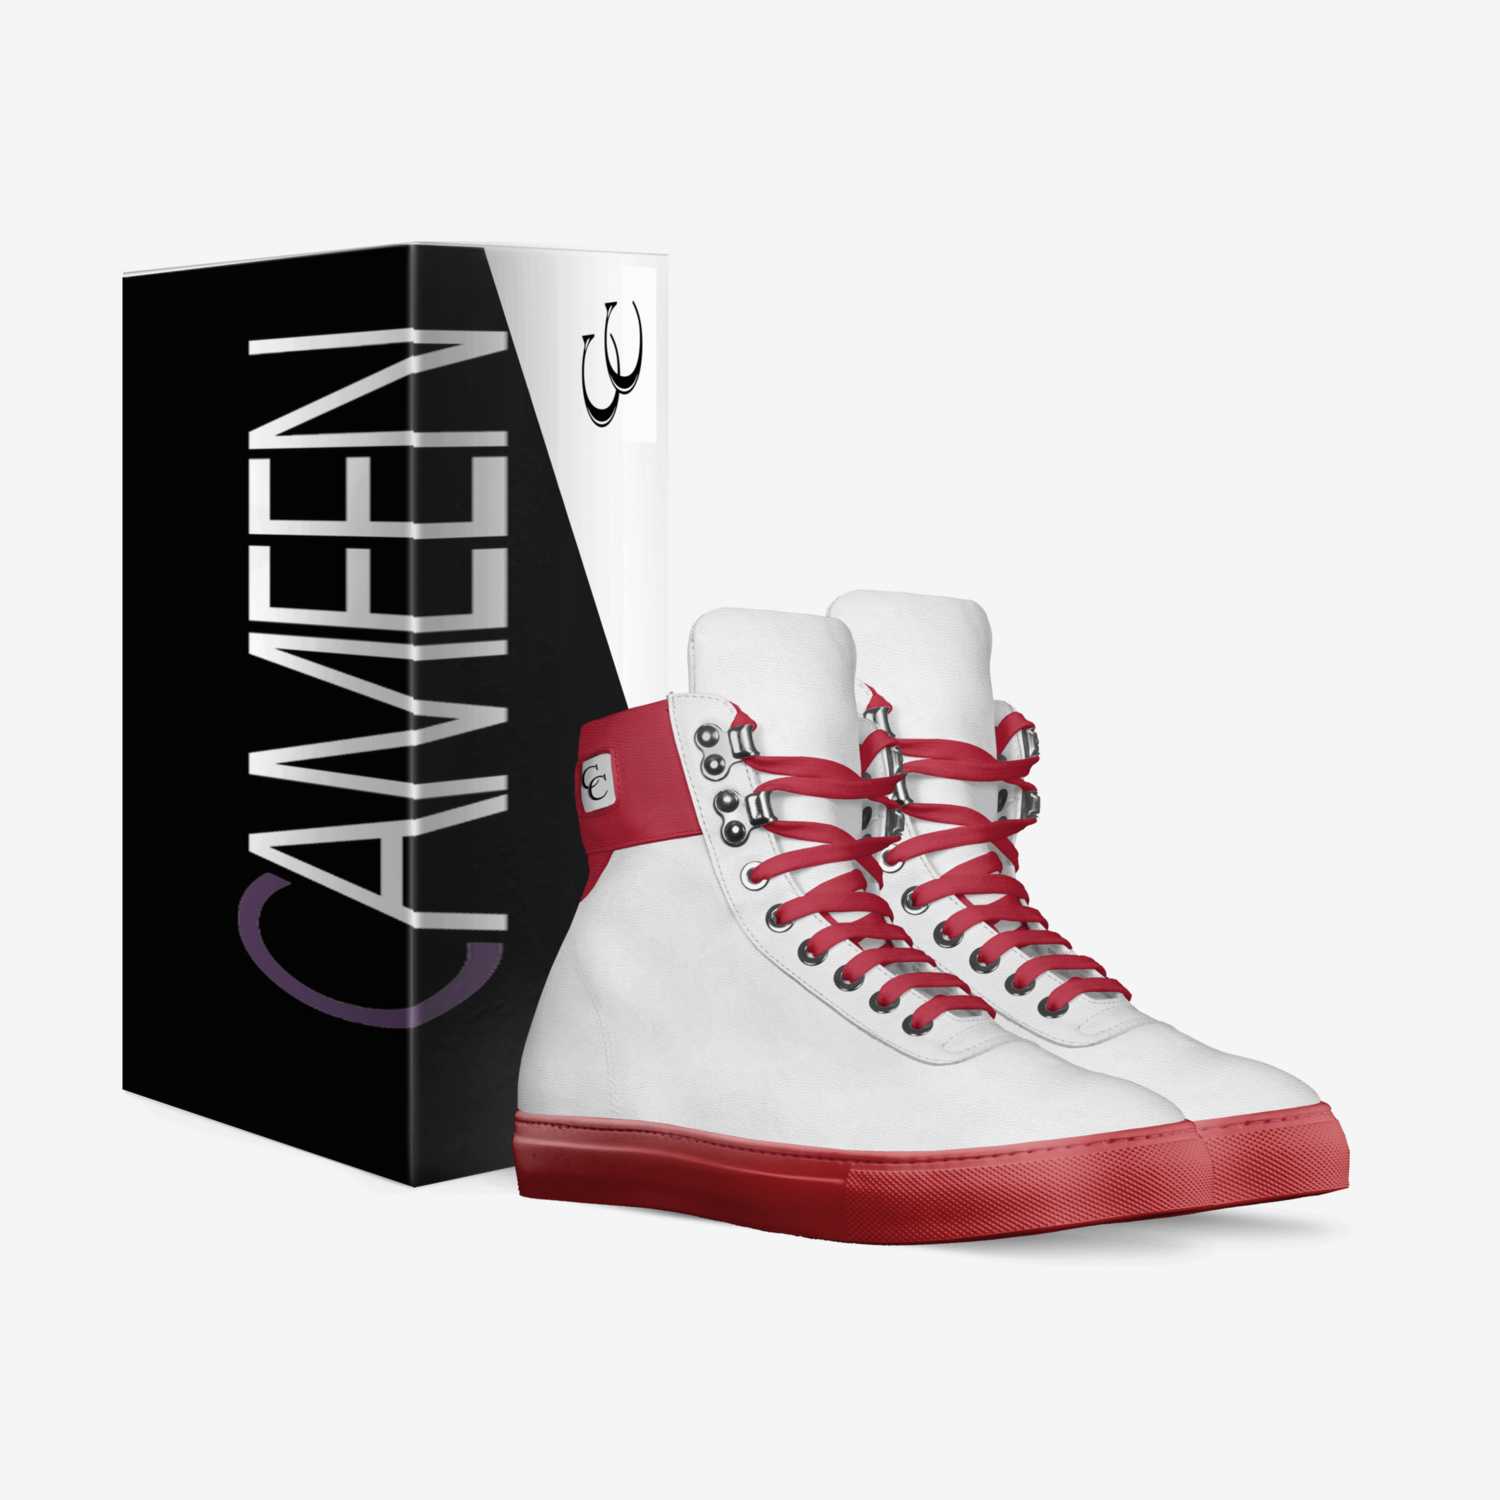 Casual Comfort custom made in Italy shoes by Cameen Copeland | Box view